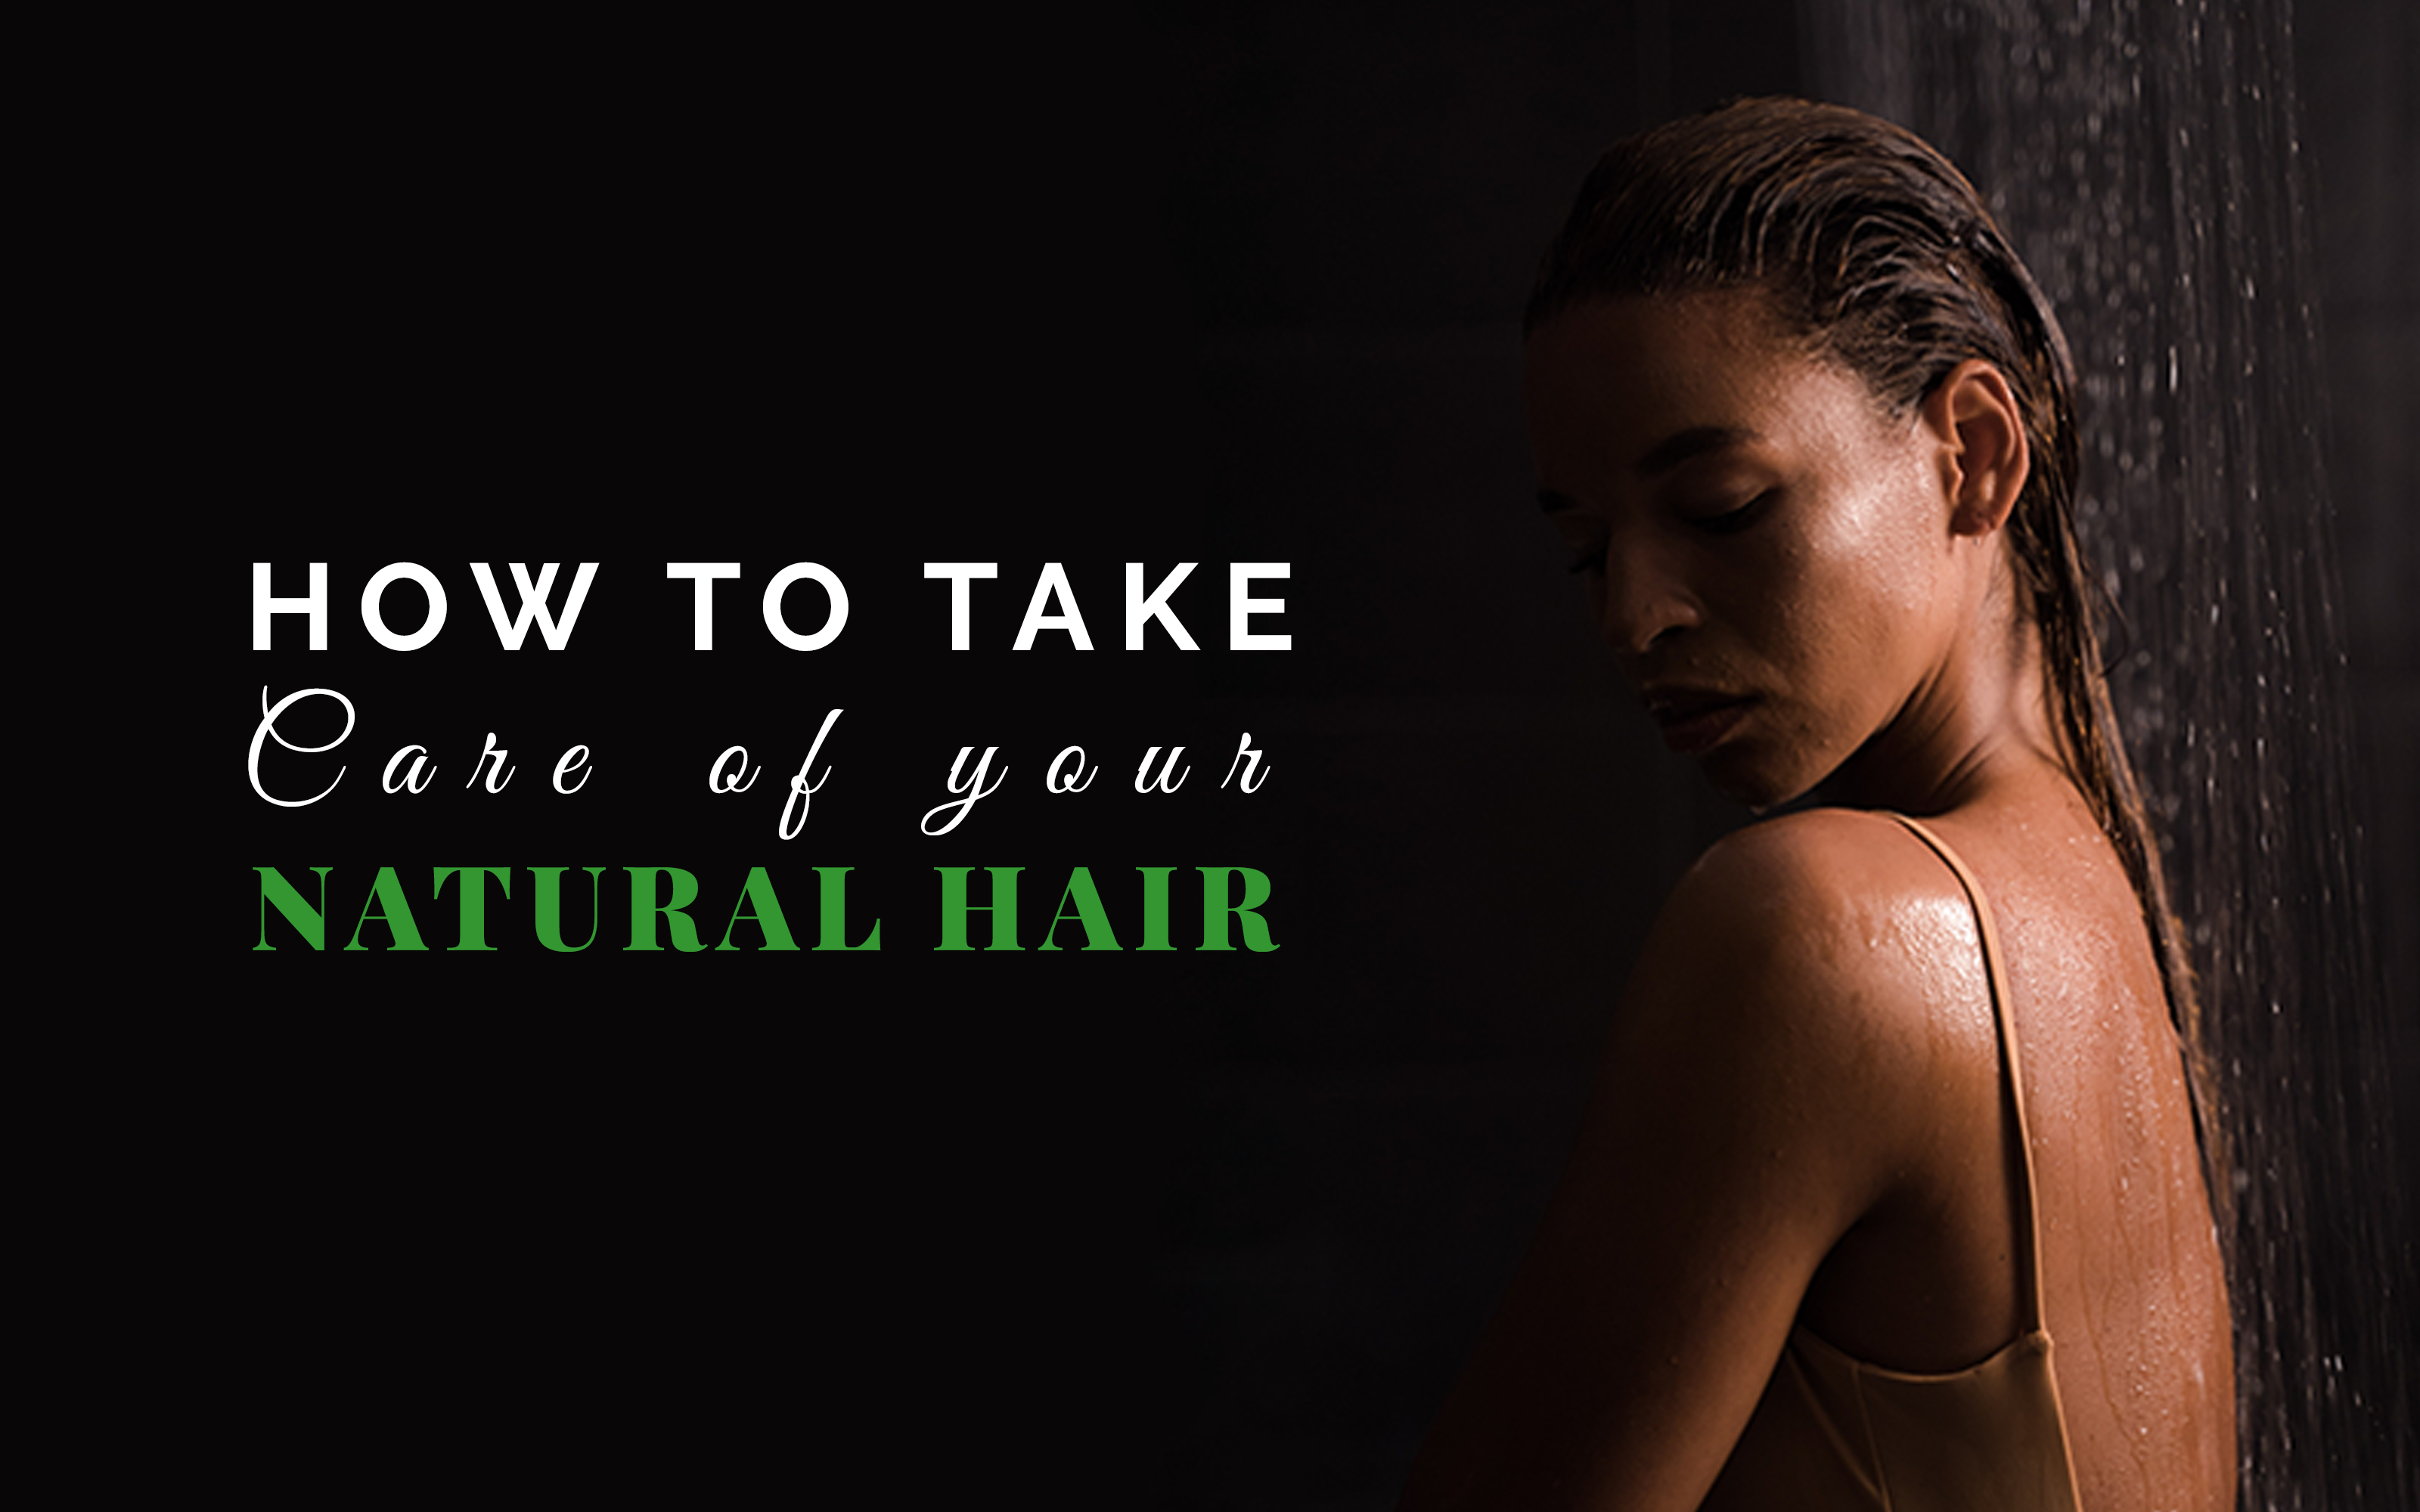 How to take care of your natural hair